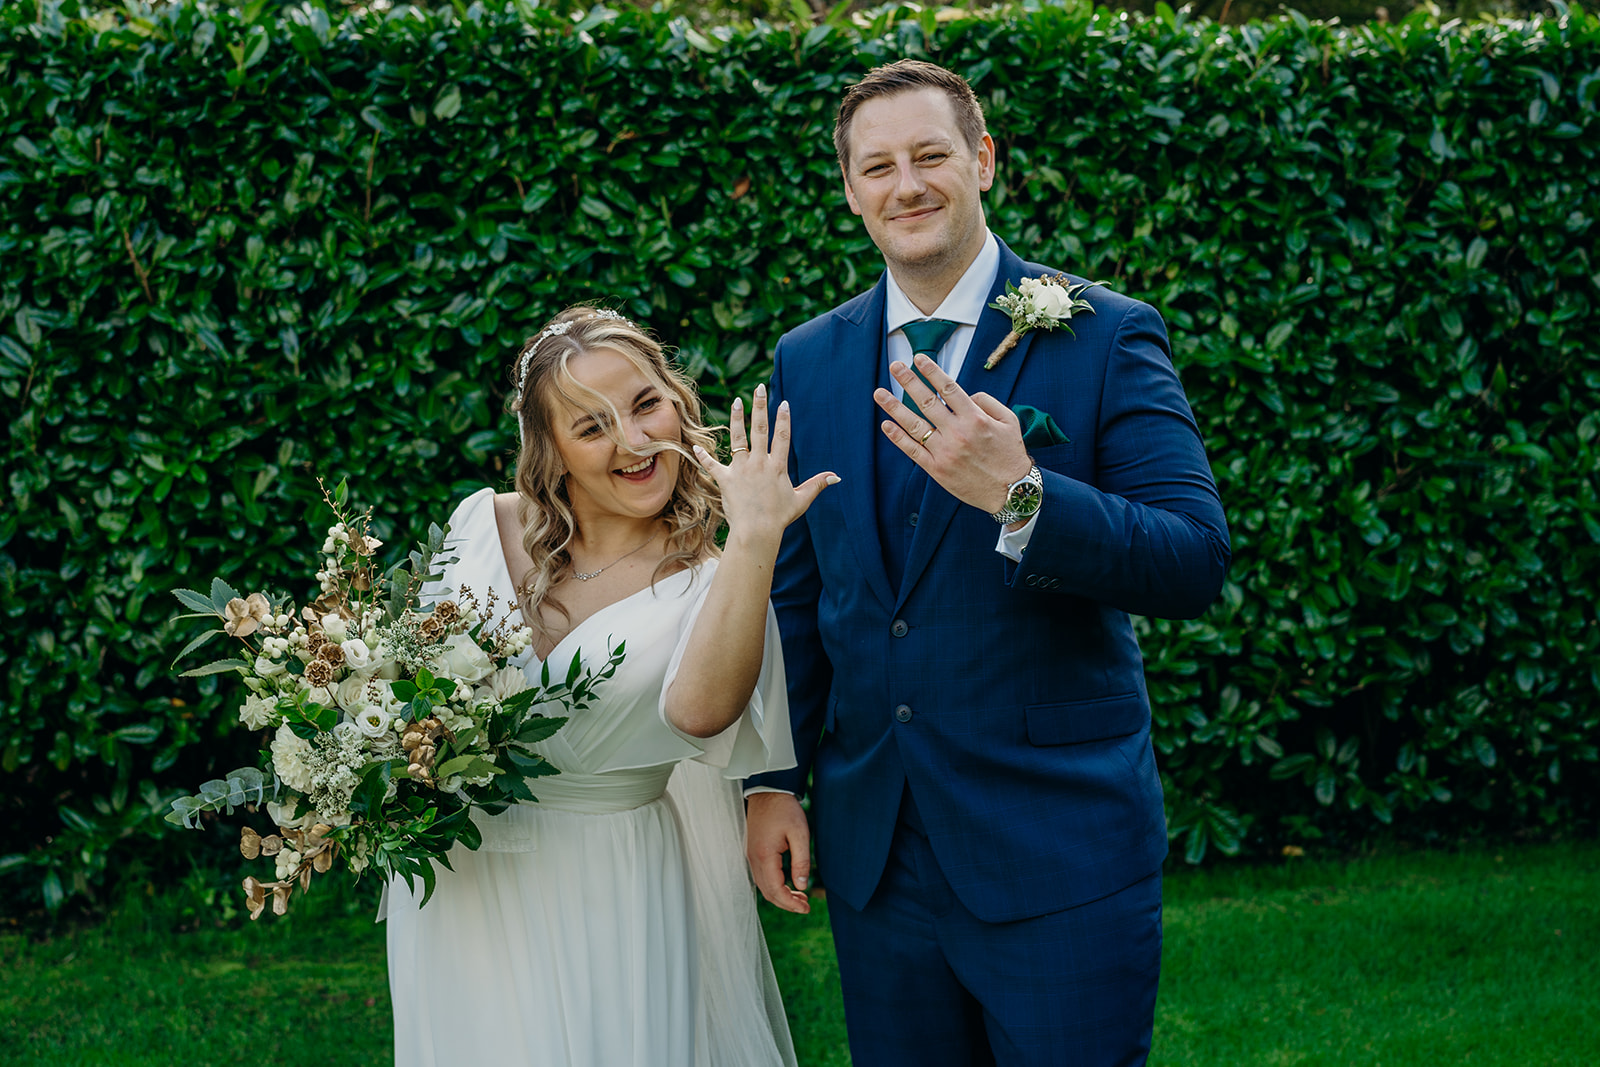 bride and groom holding up wedding ring fingers to show new wedding rings